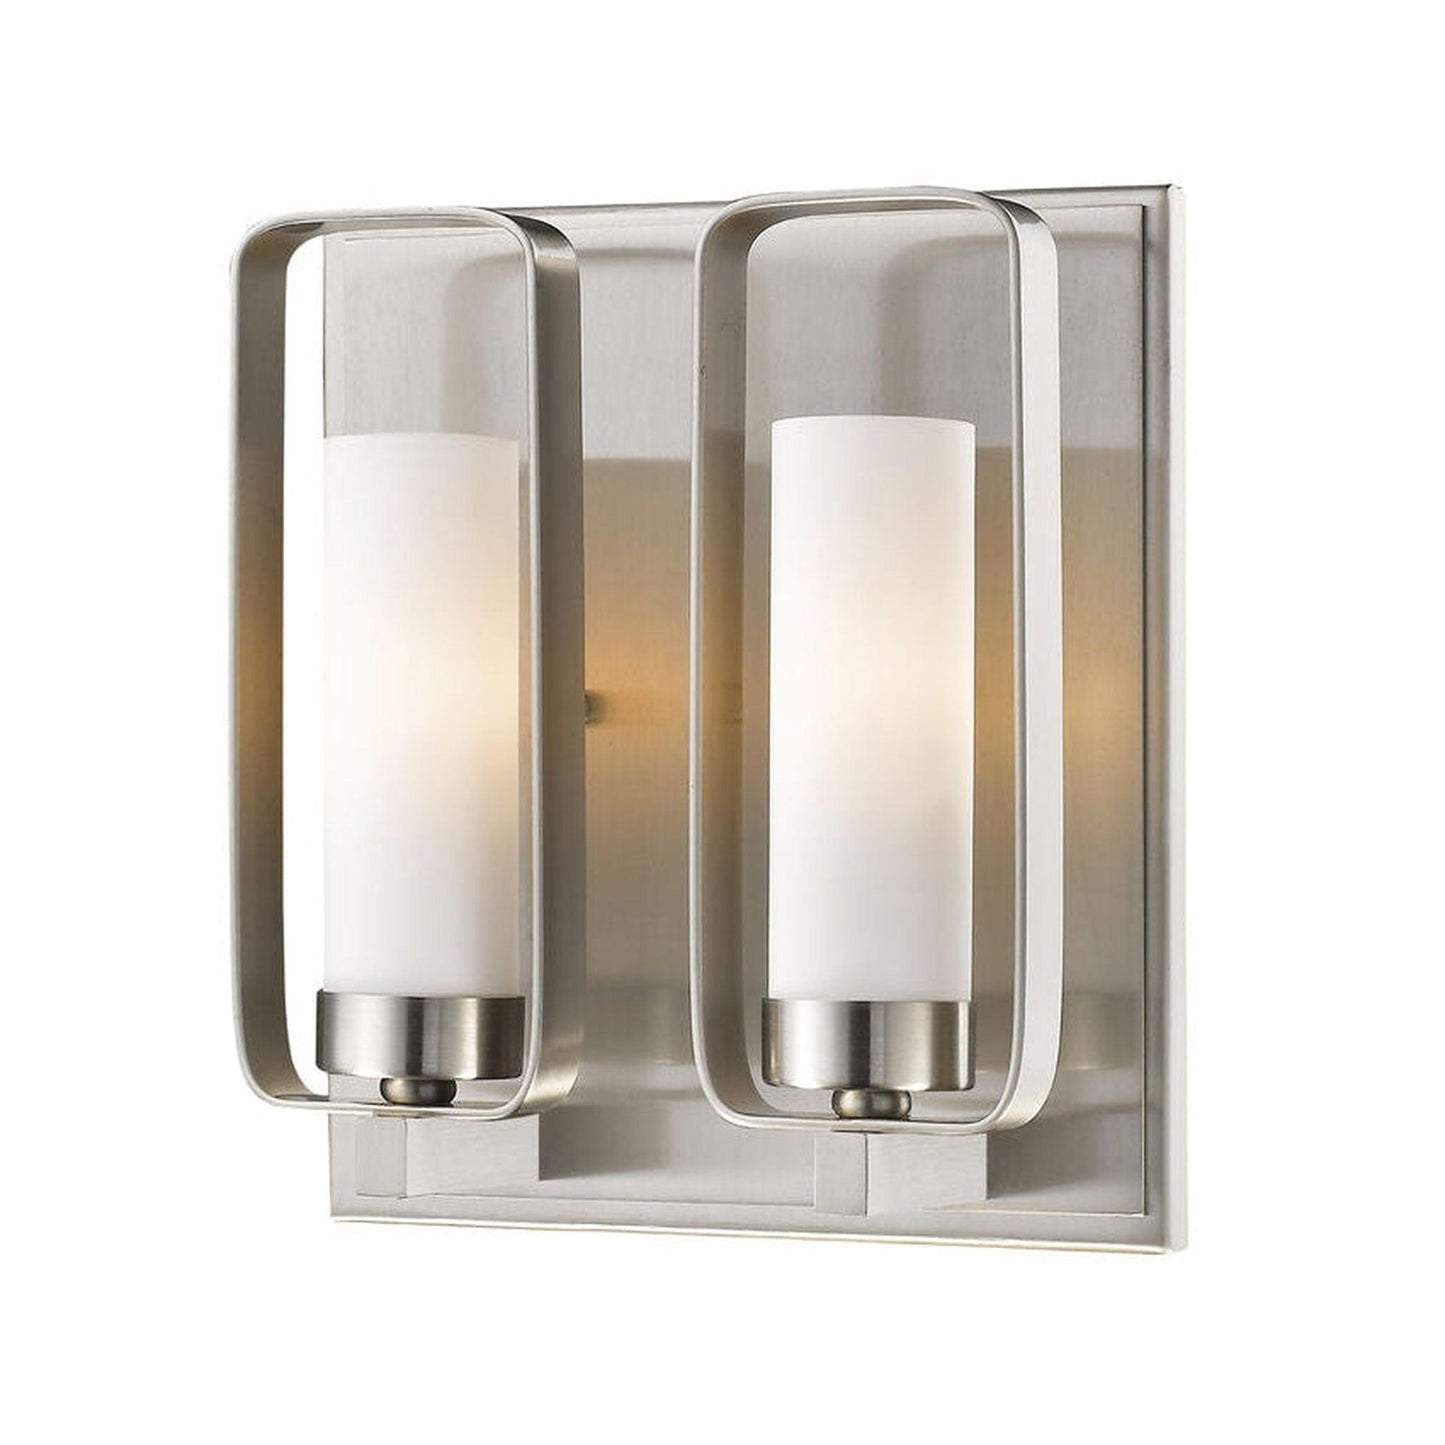 Z-Lite Aideen 9" 2-Light Brushed Nickel Wall Sconce With Matte Opal Glass Shade